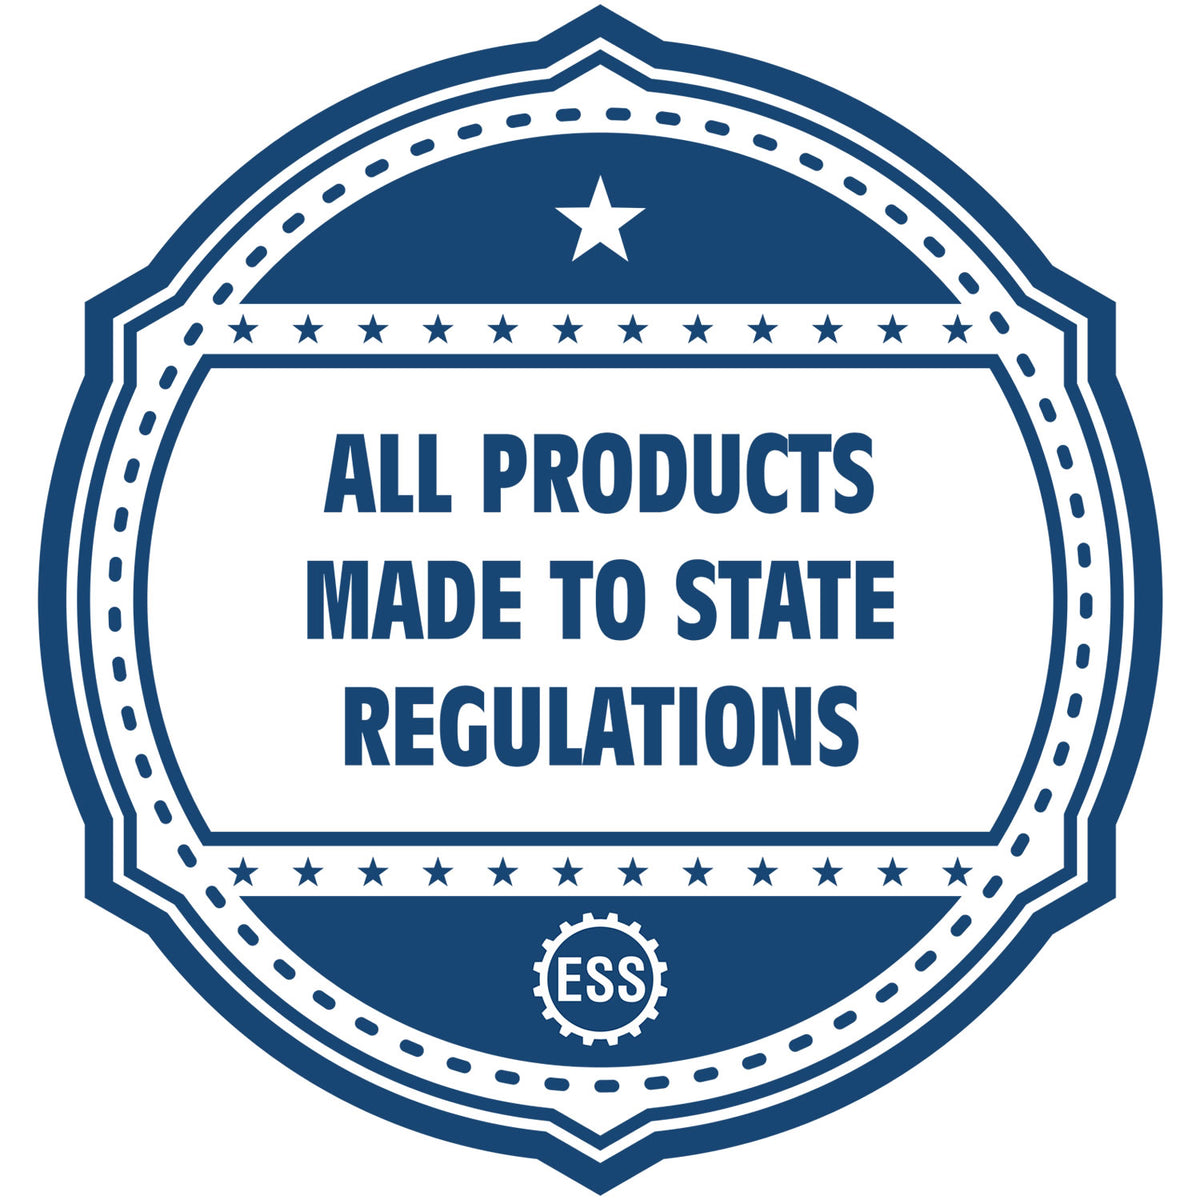 An icon or badge element for the State of Colorado Soft Land Surveyor Embossing Seal showing that this product is made in compliance with state regulations.